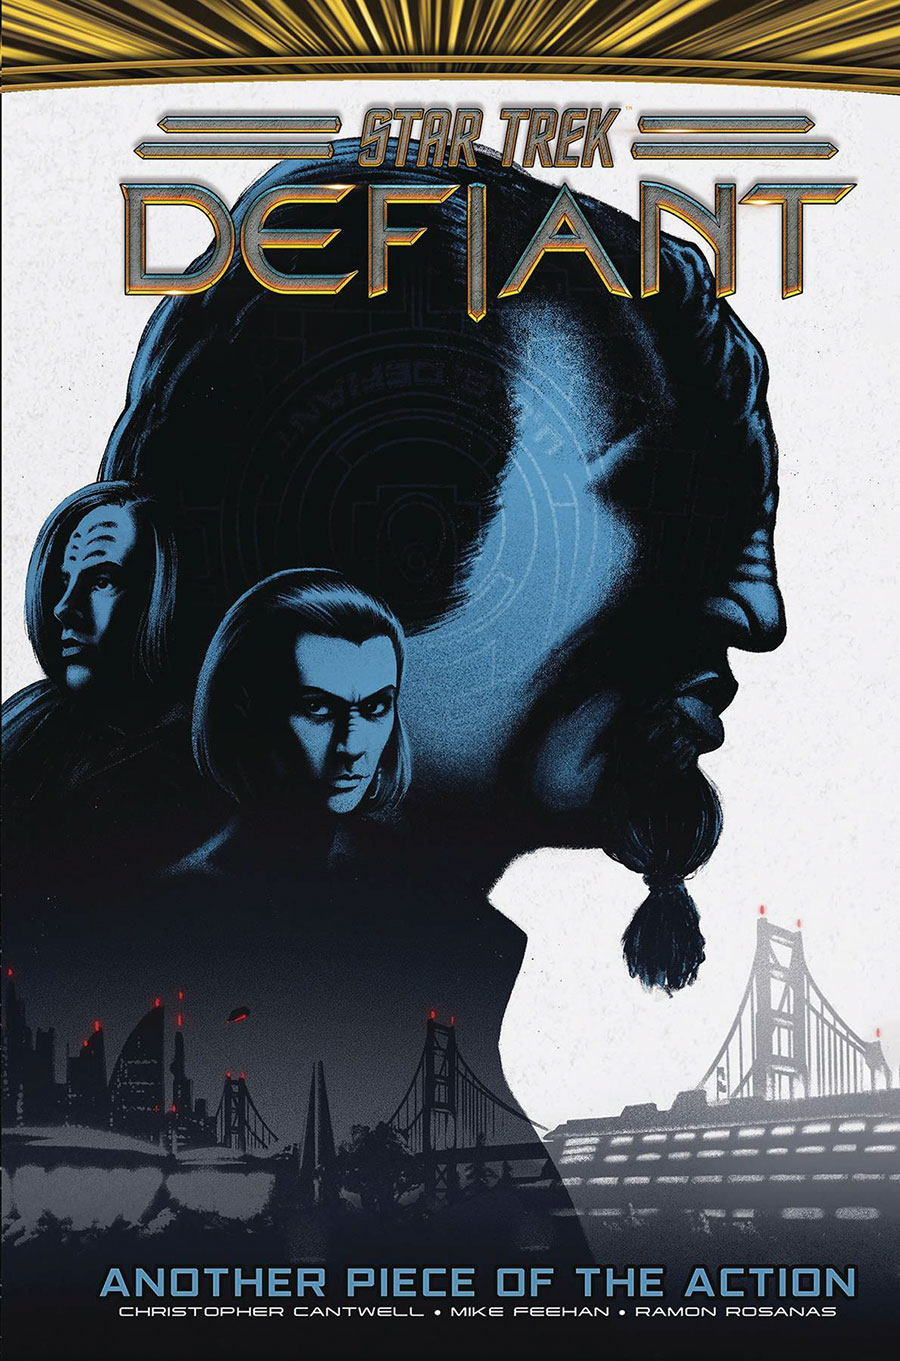 Star Trek Defiant Vol 2 Another Piece Of The Action HC